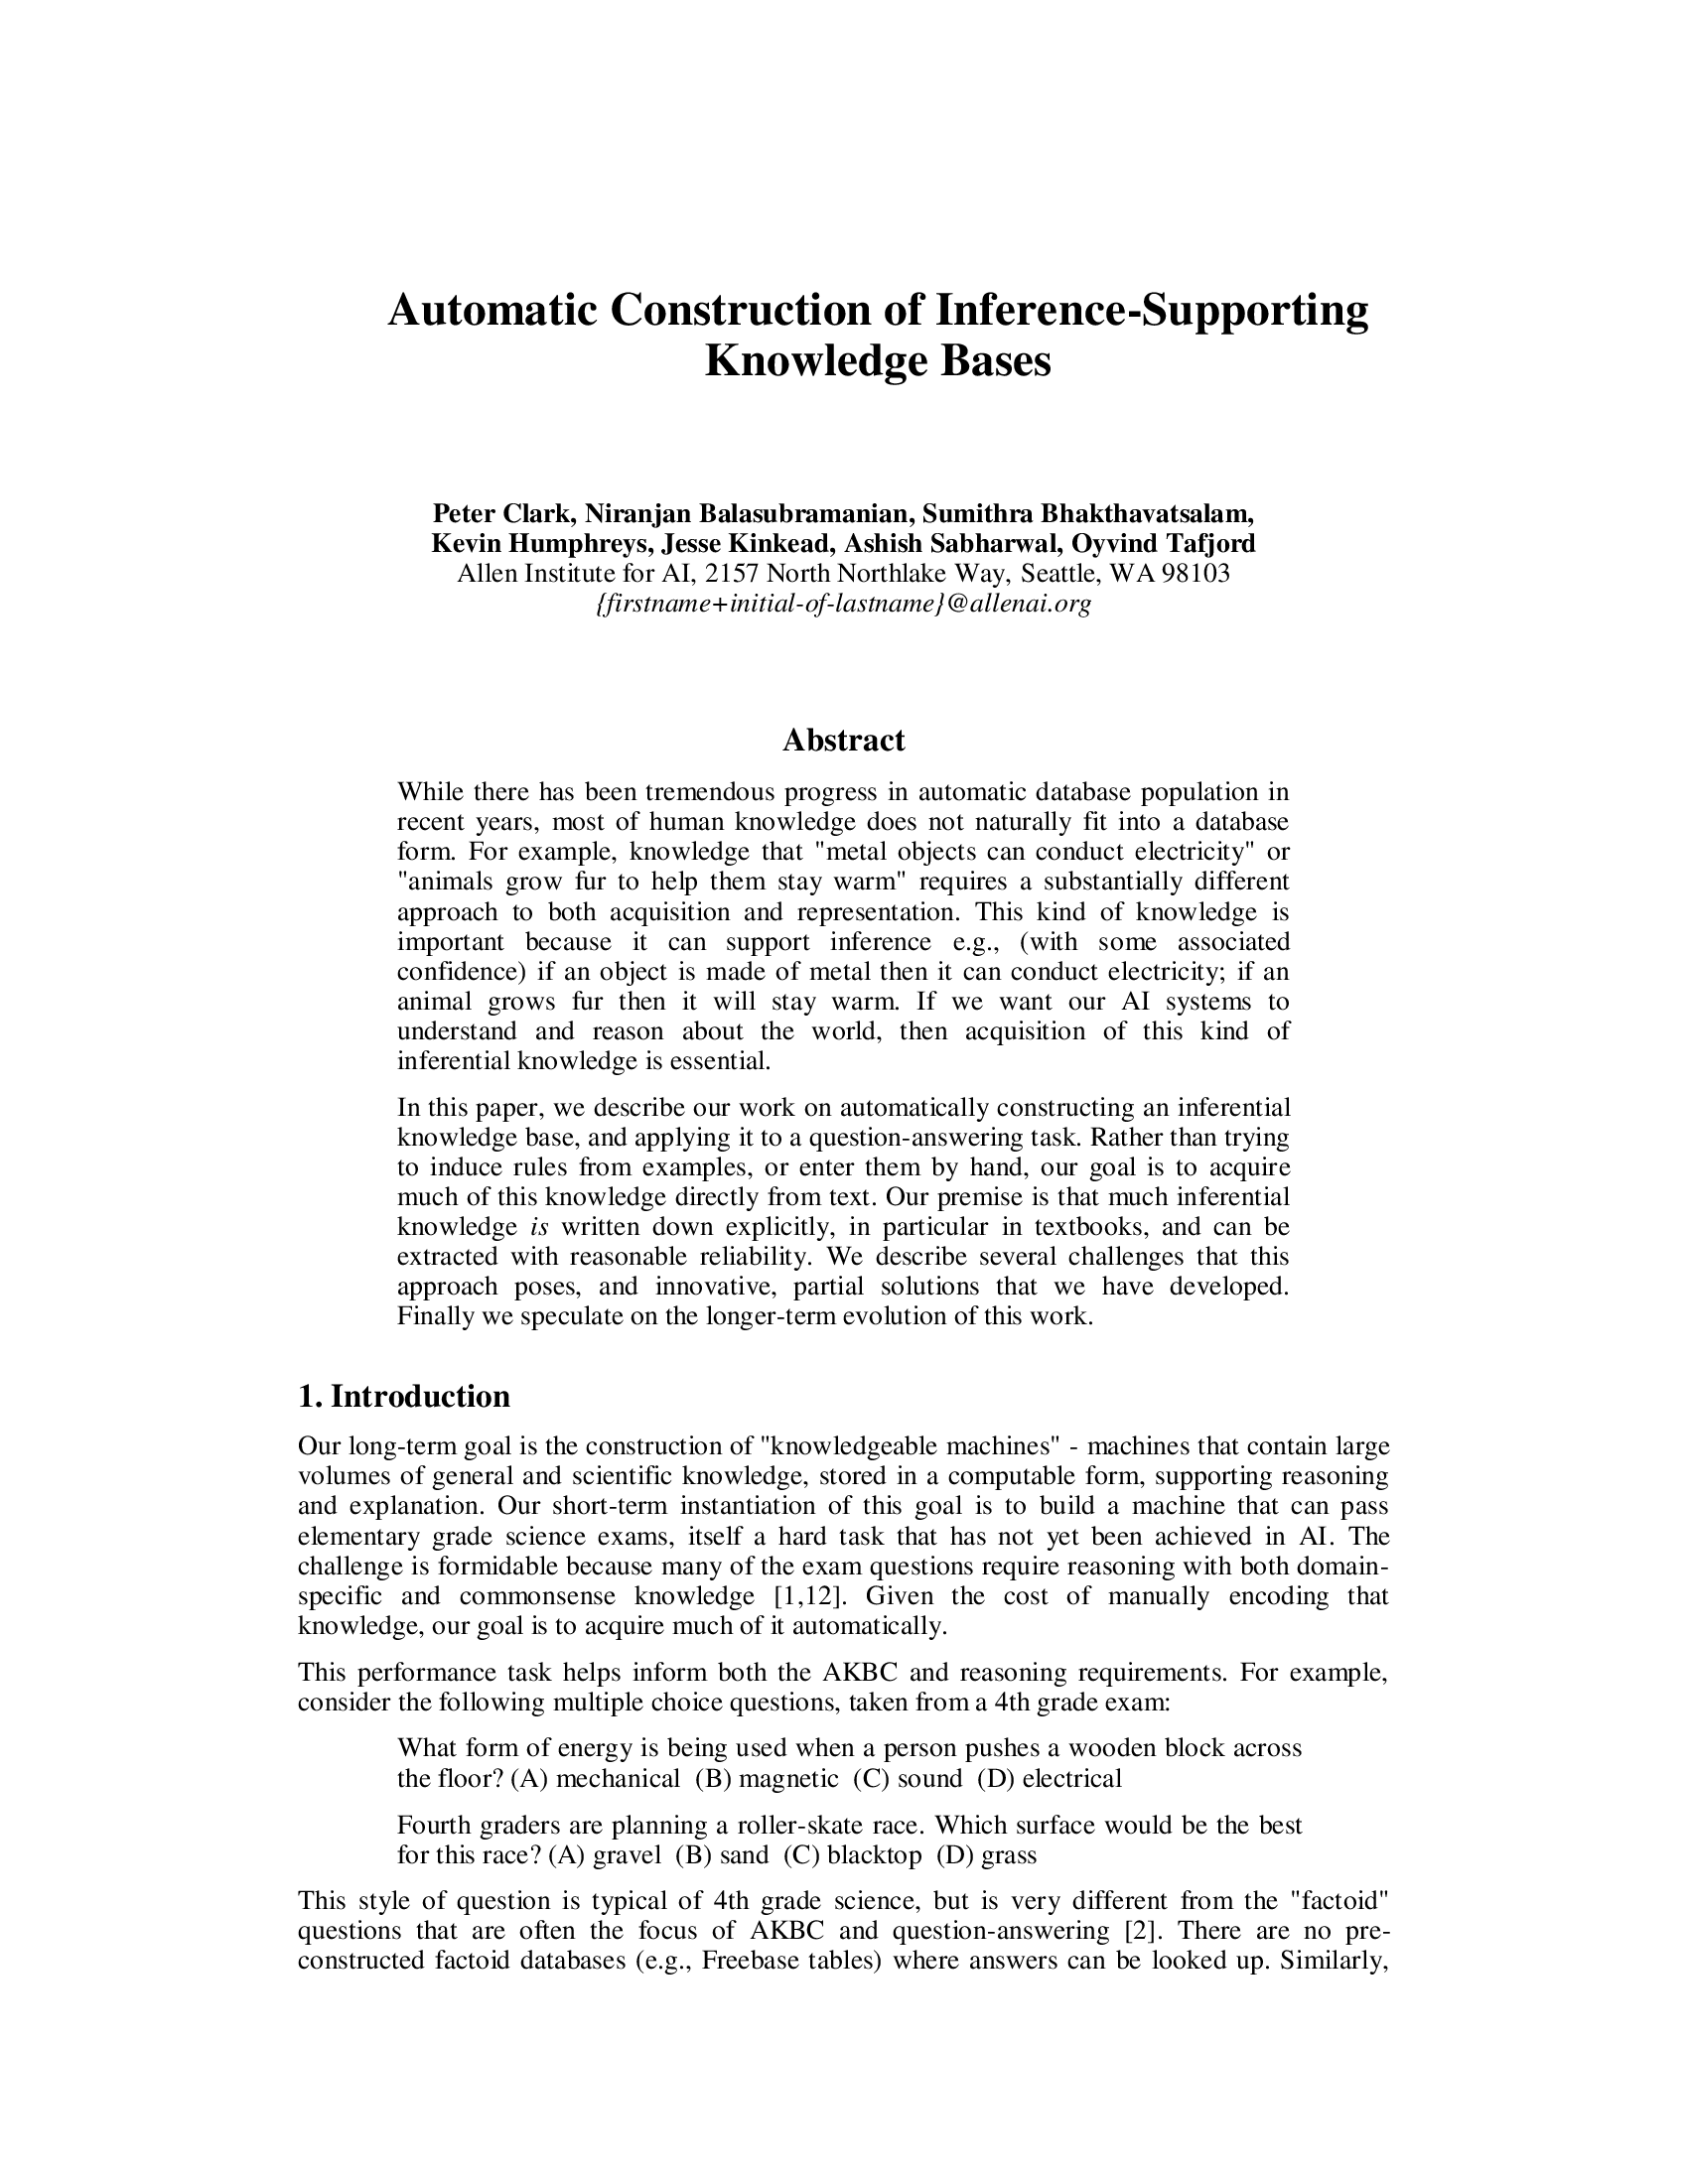 Automatic Construction of Inference-Supporting Knowledge Bases